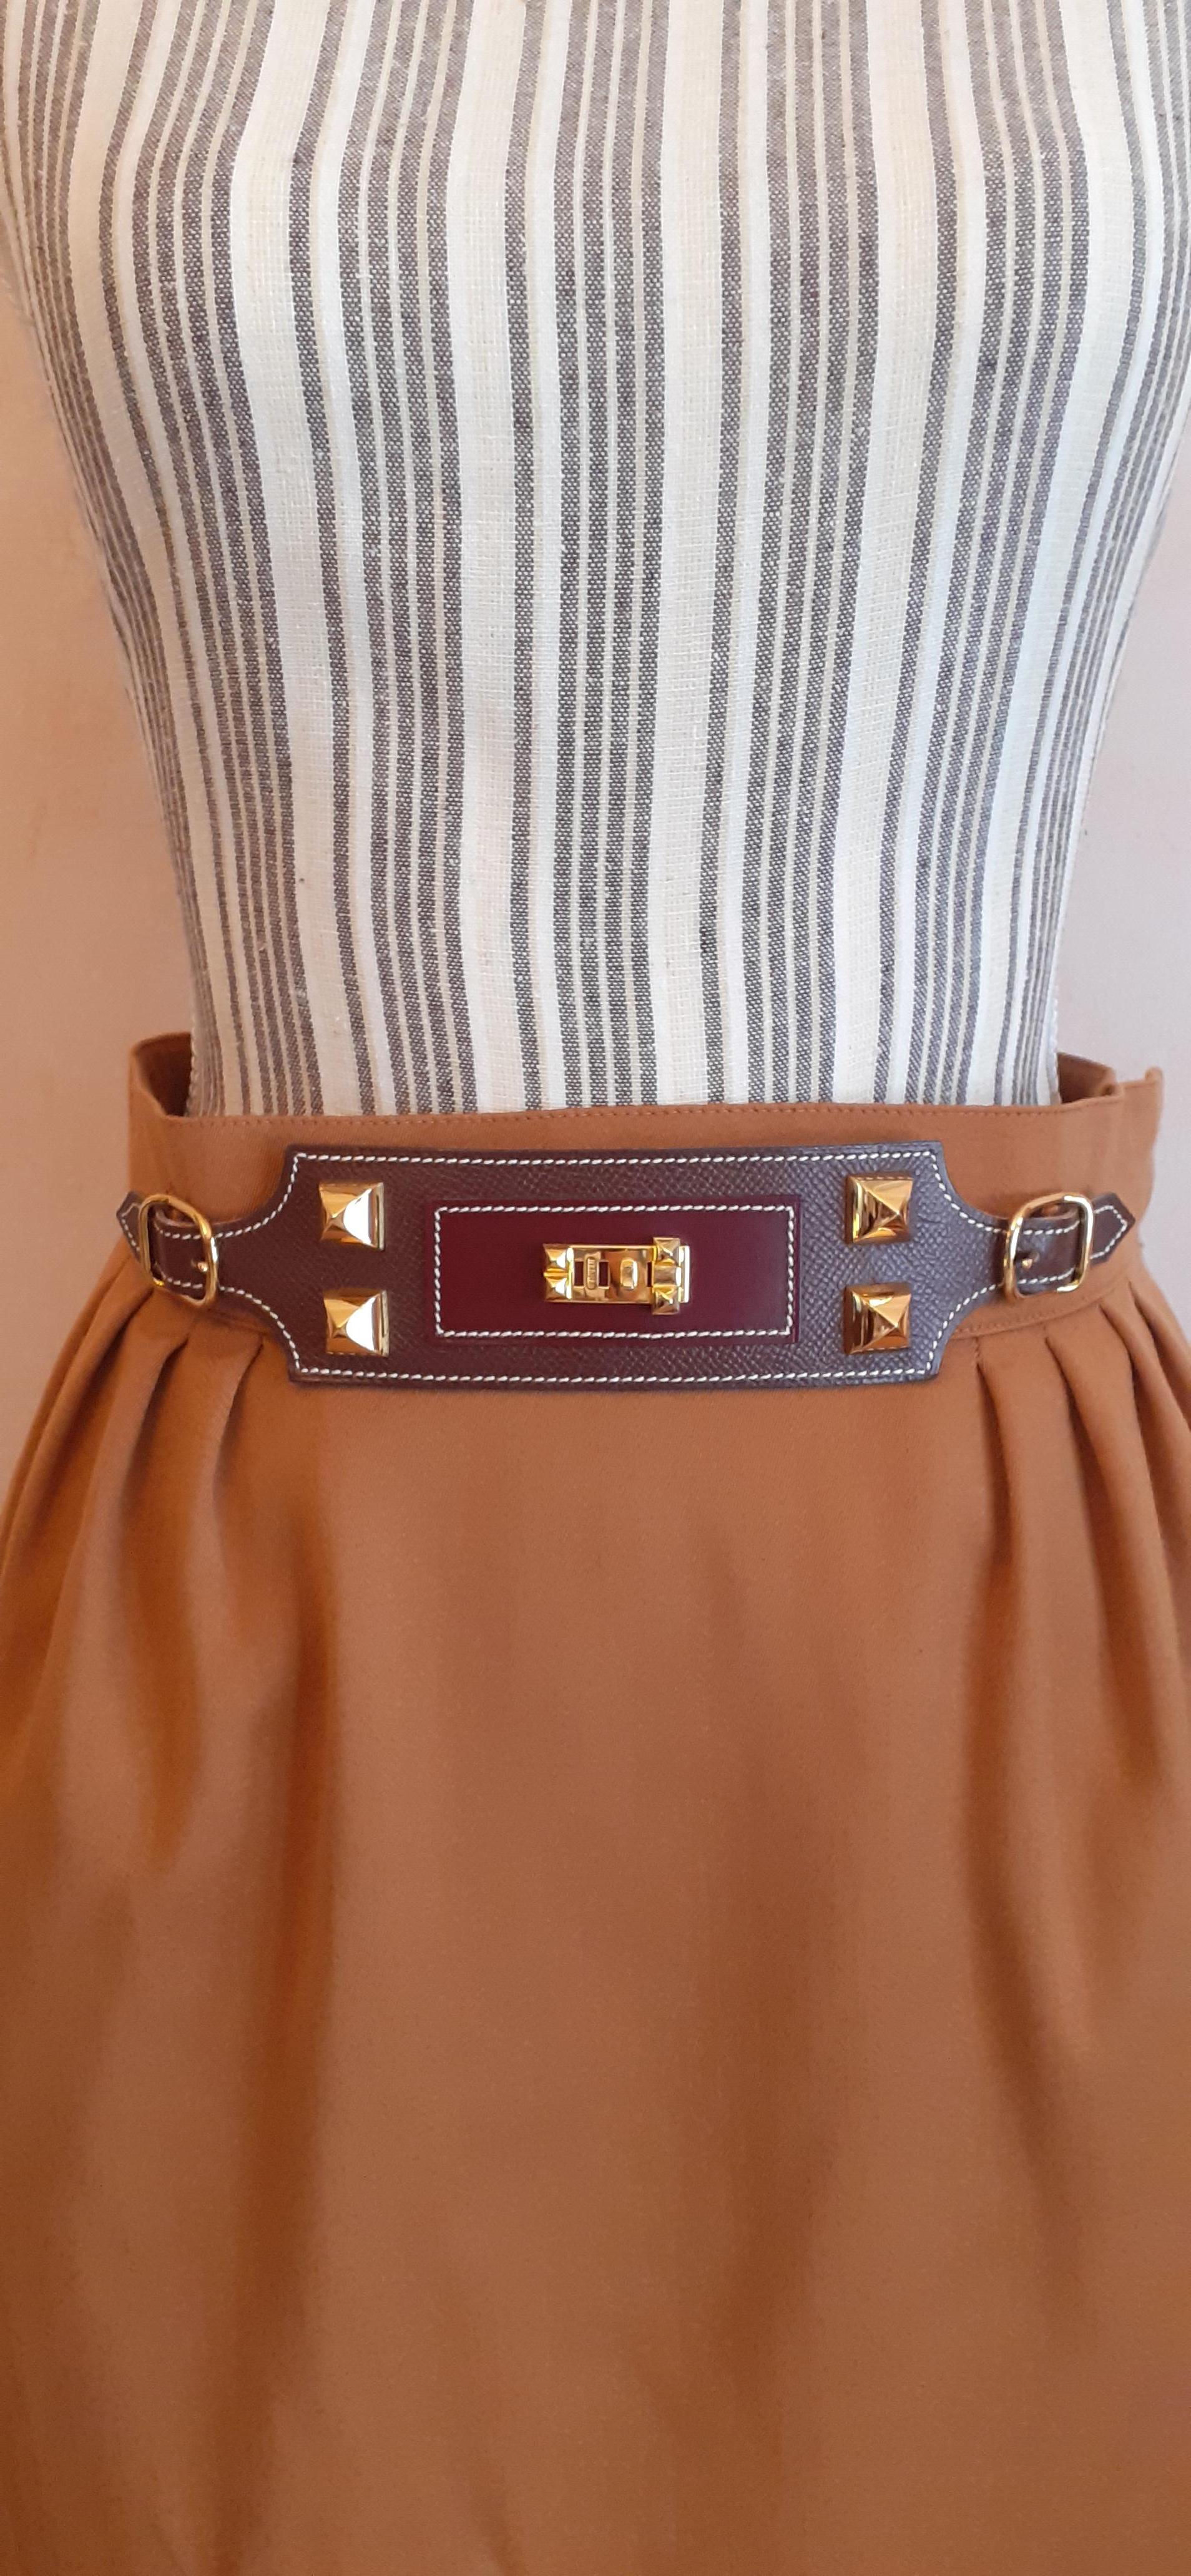 Hermès Ornament Adornment for Skirt in Brown Leather and Golden Medor Studs RARE For Sale 11